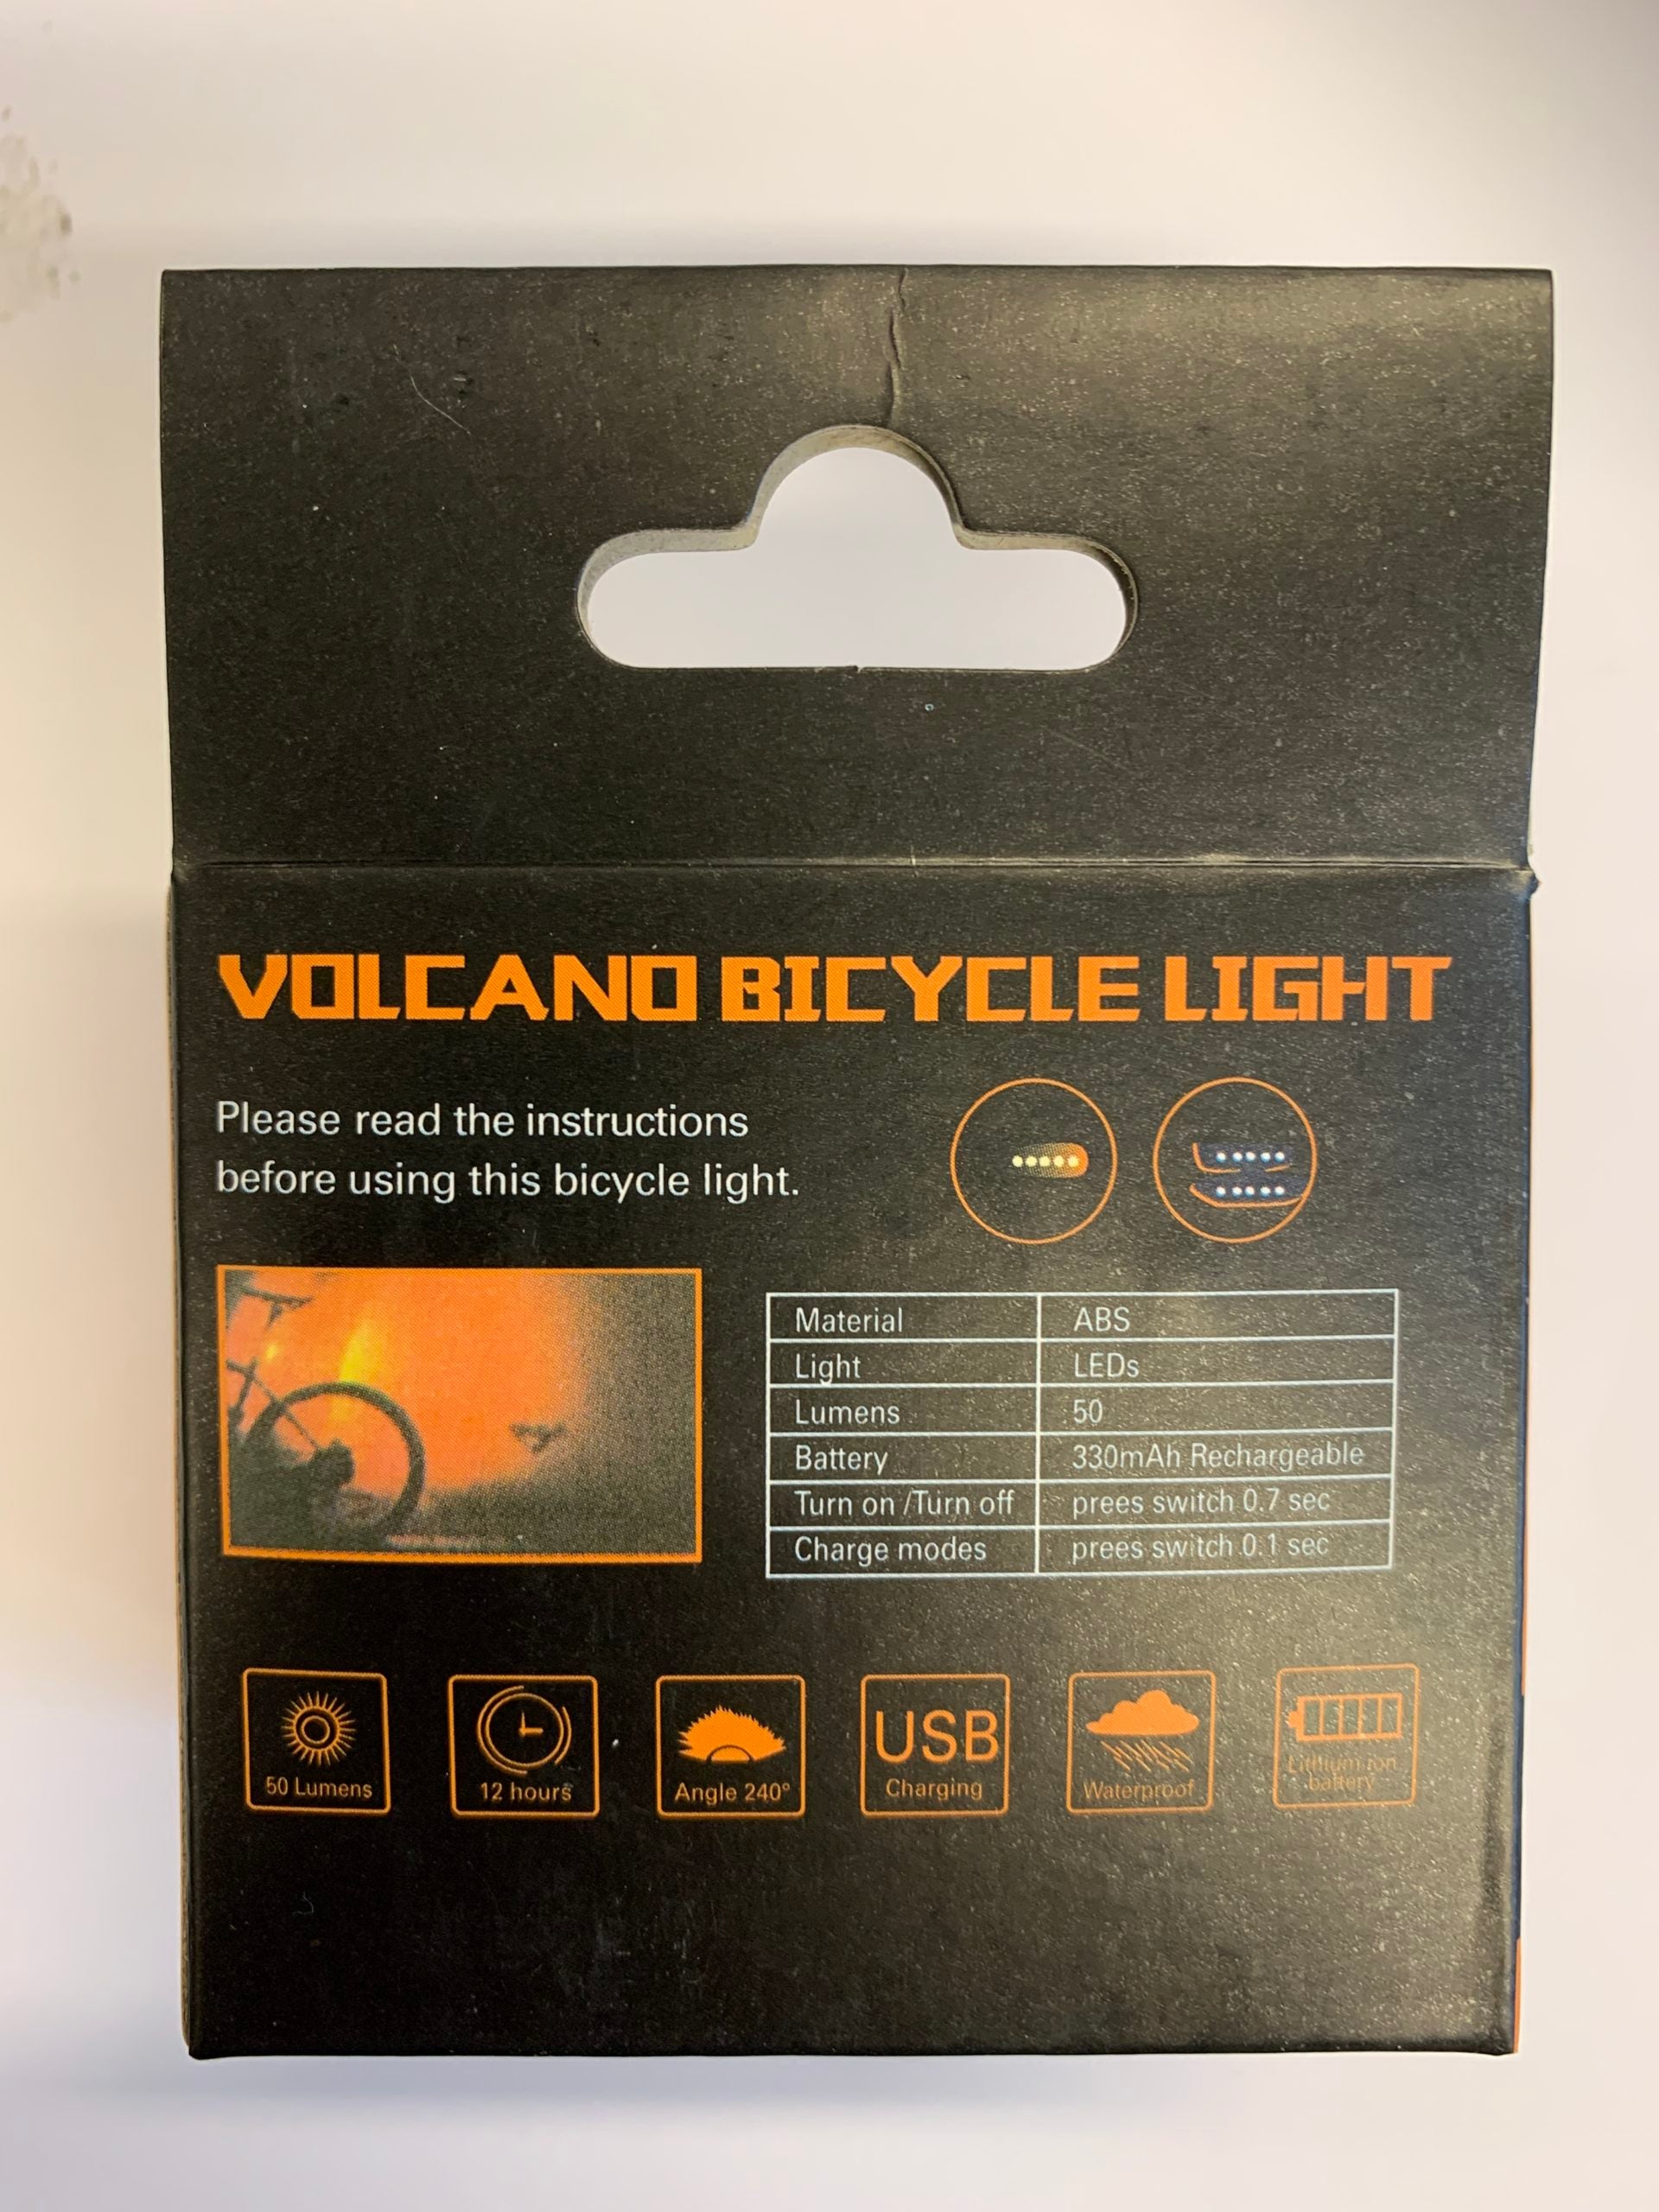 Bicycle light, rechargeable USB